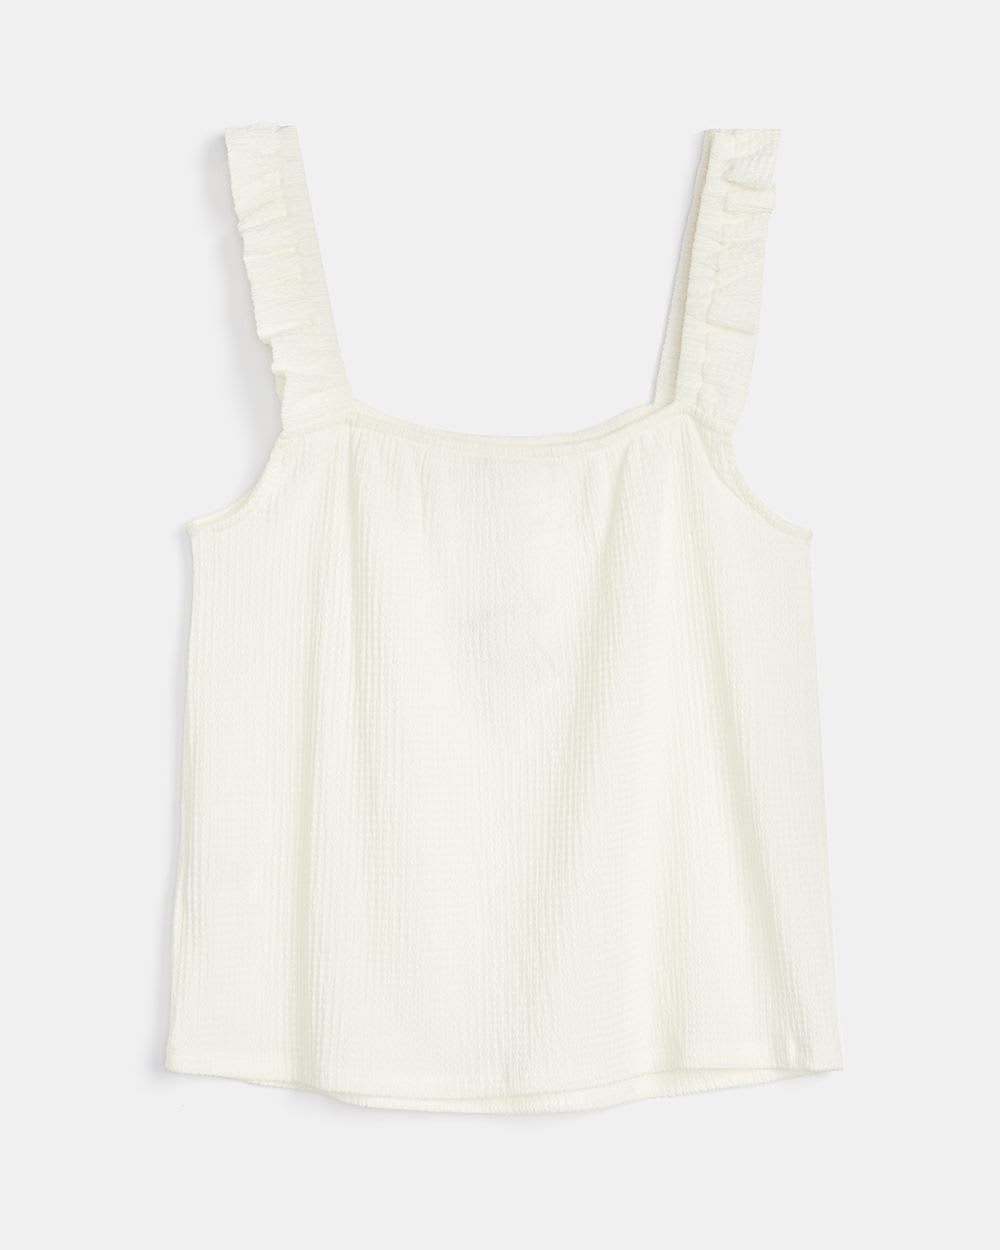 Square-Neck Blistered Tank Top with Frilly Straps